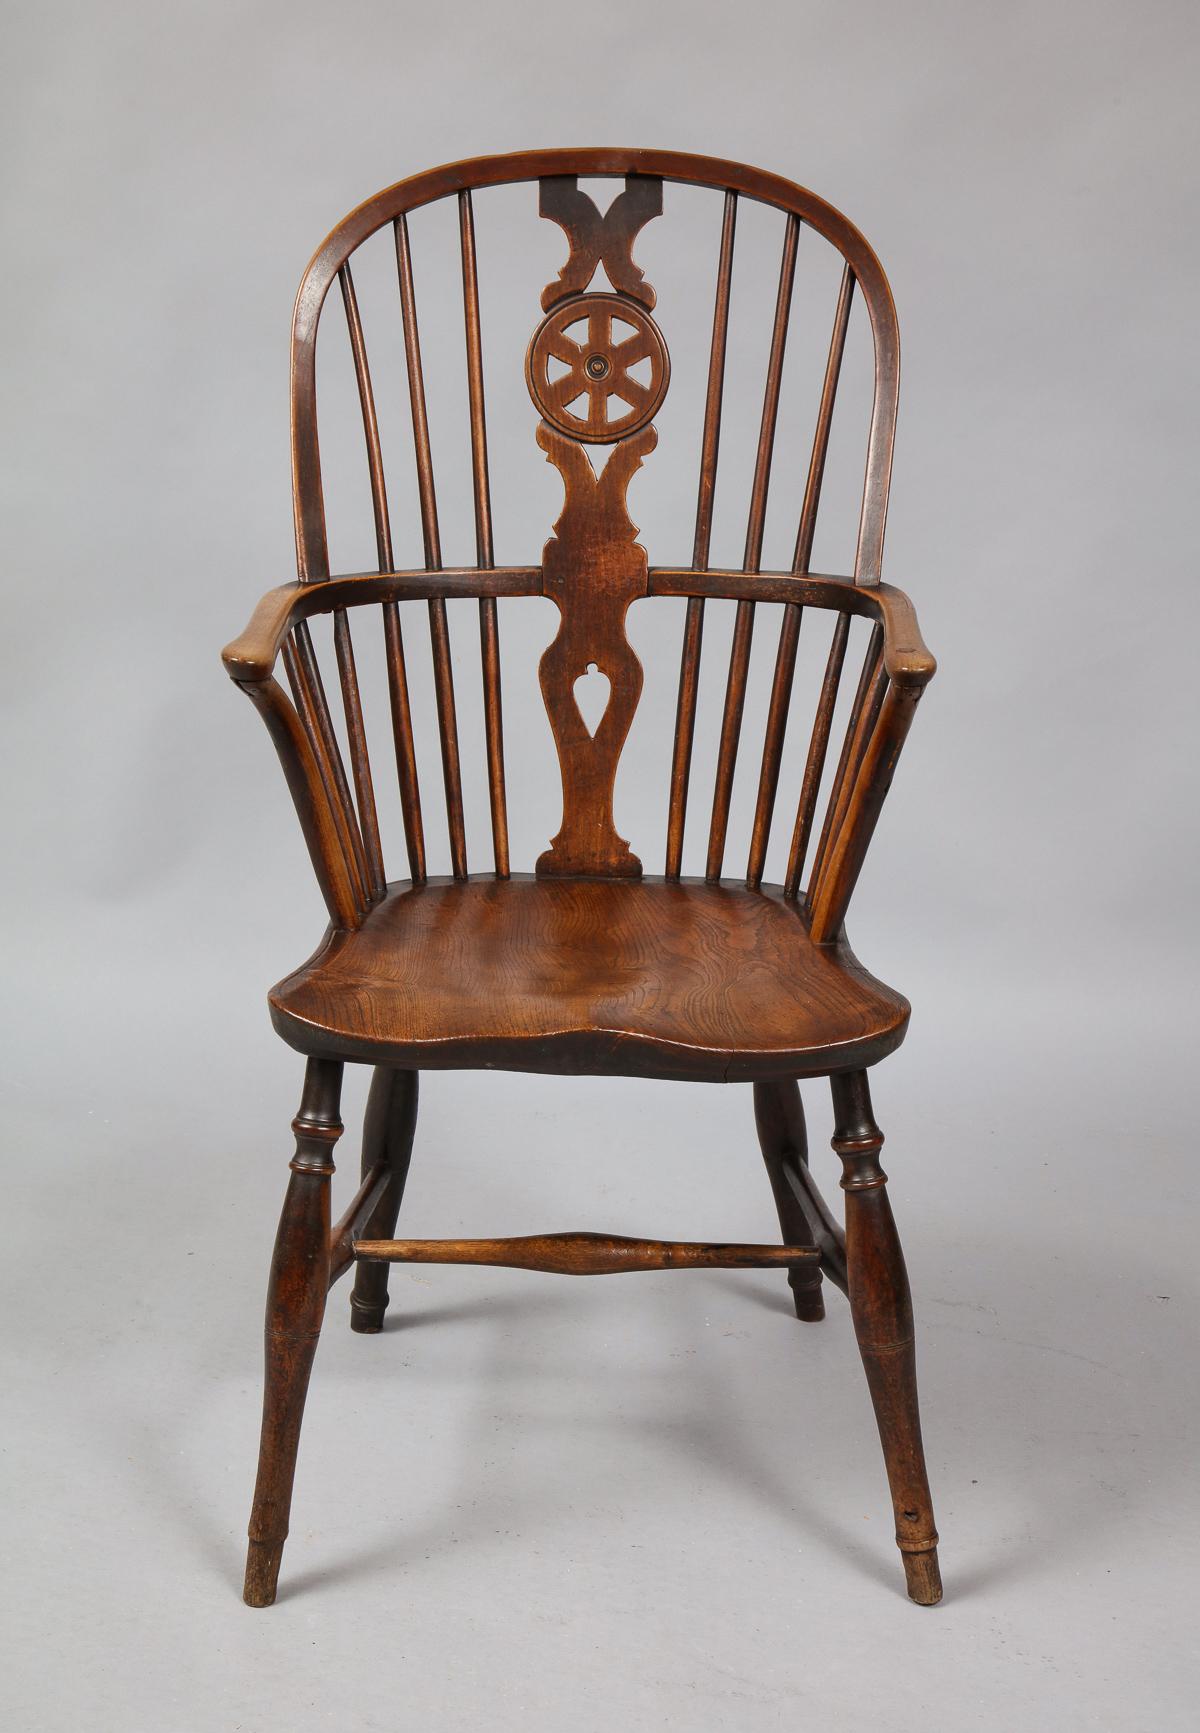 A good mid-19th century English hoop back Windsor armchair having pierced wheel splat over shaped elm seat and well turned legs joined by 